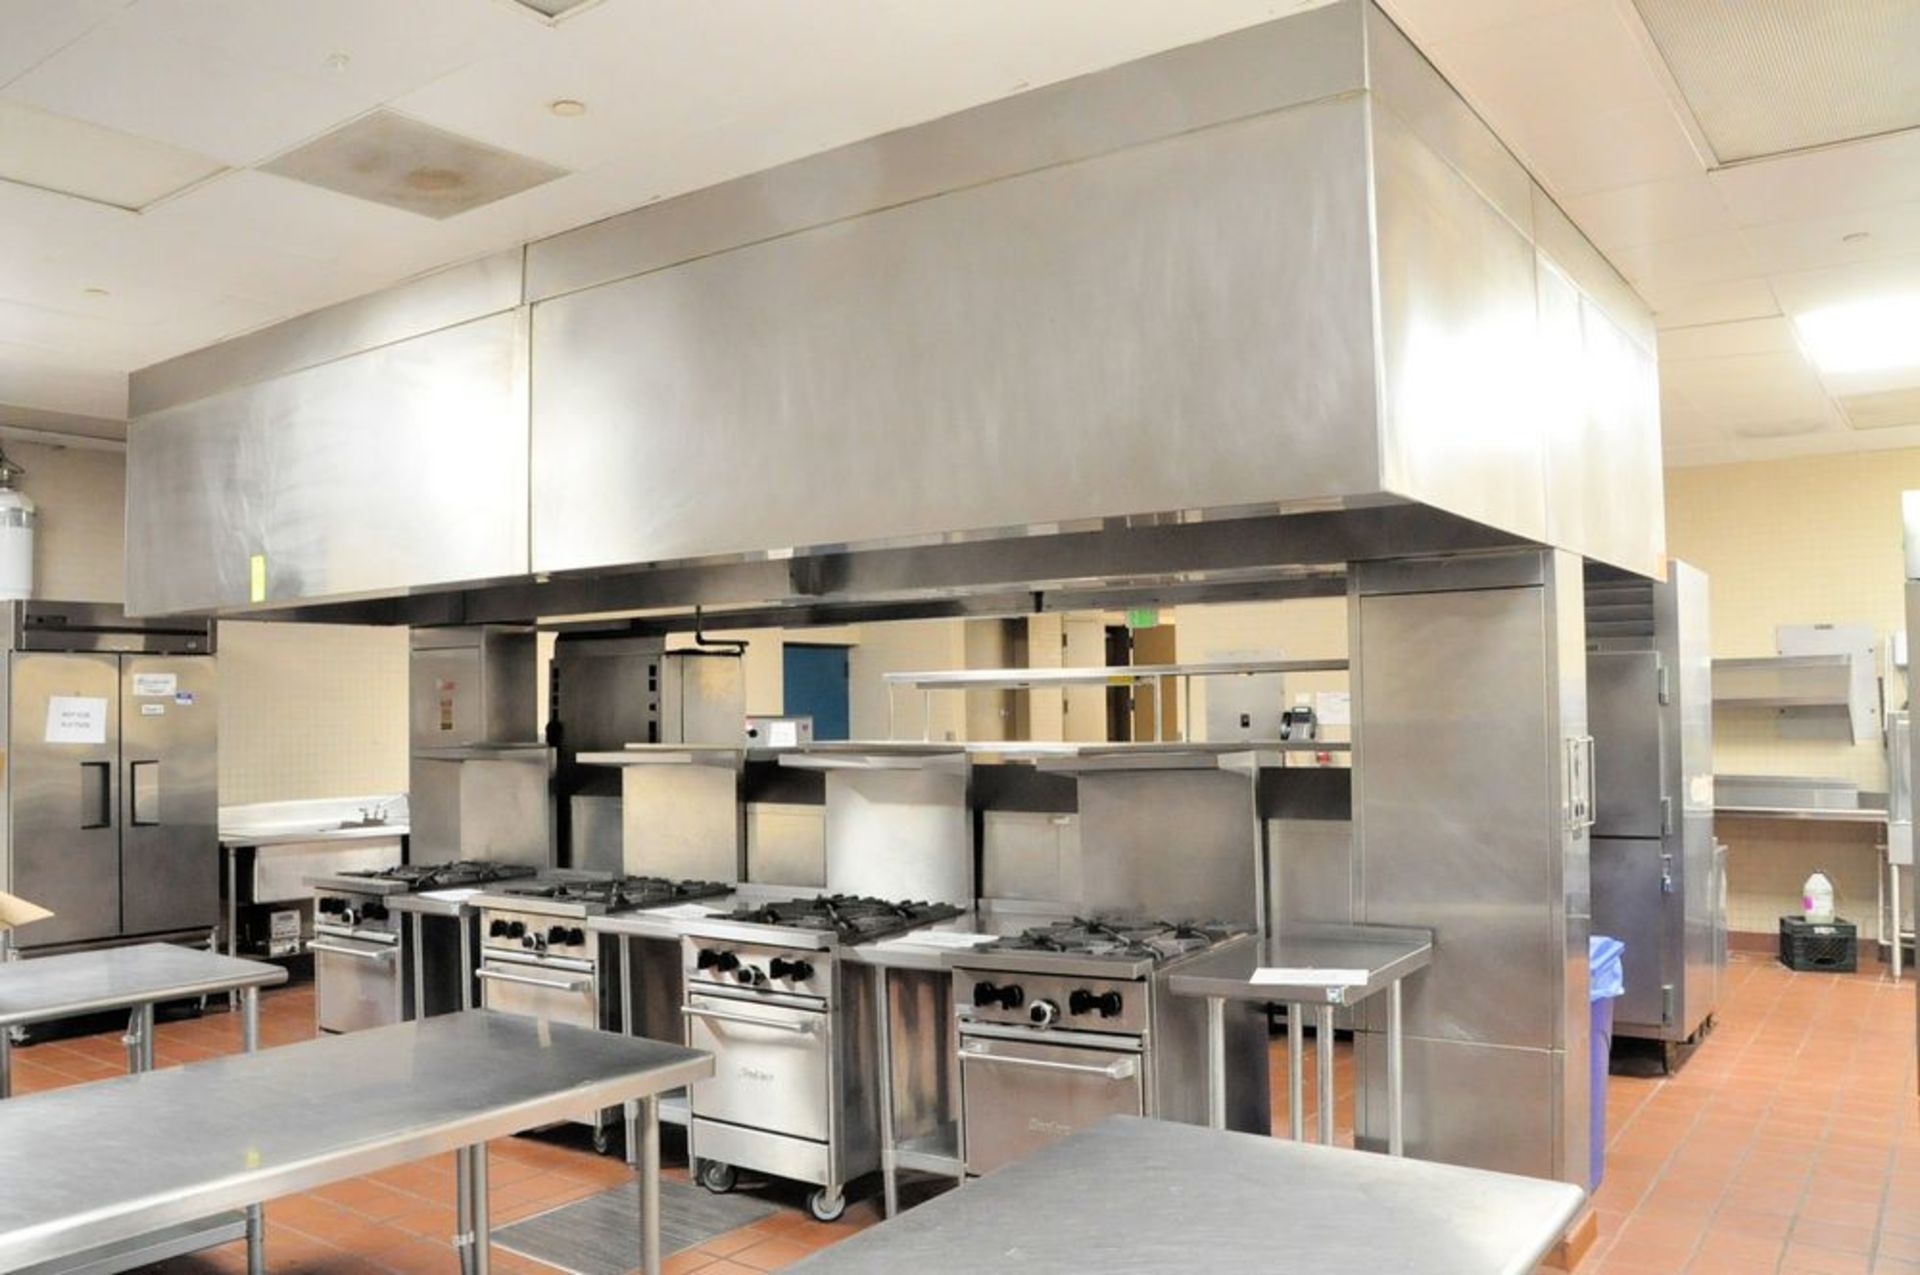 Stainless Steel 10' x 18' Exhaust Hood with Fire Suppression, (Main Kitchen Area-Back Kitchen), (1st - Image 2 of 7